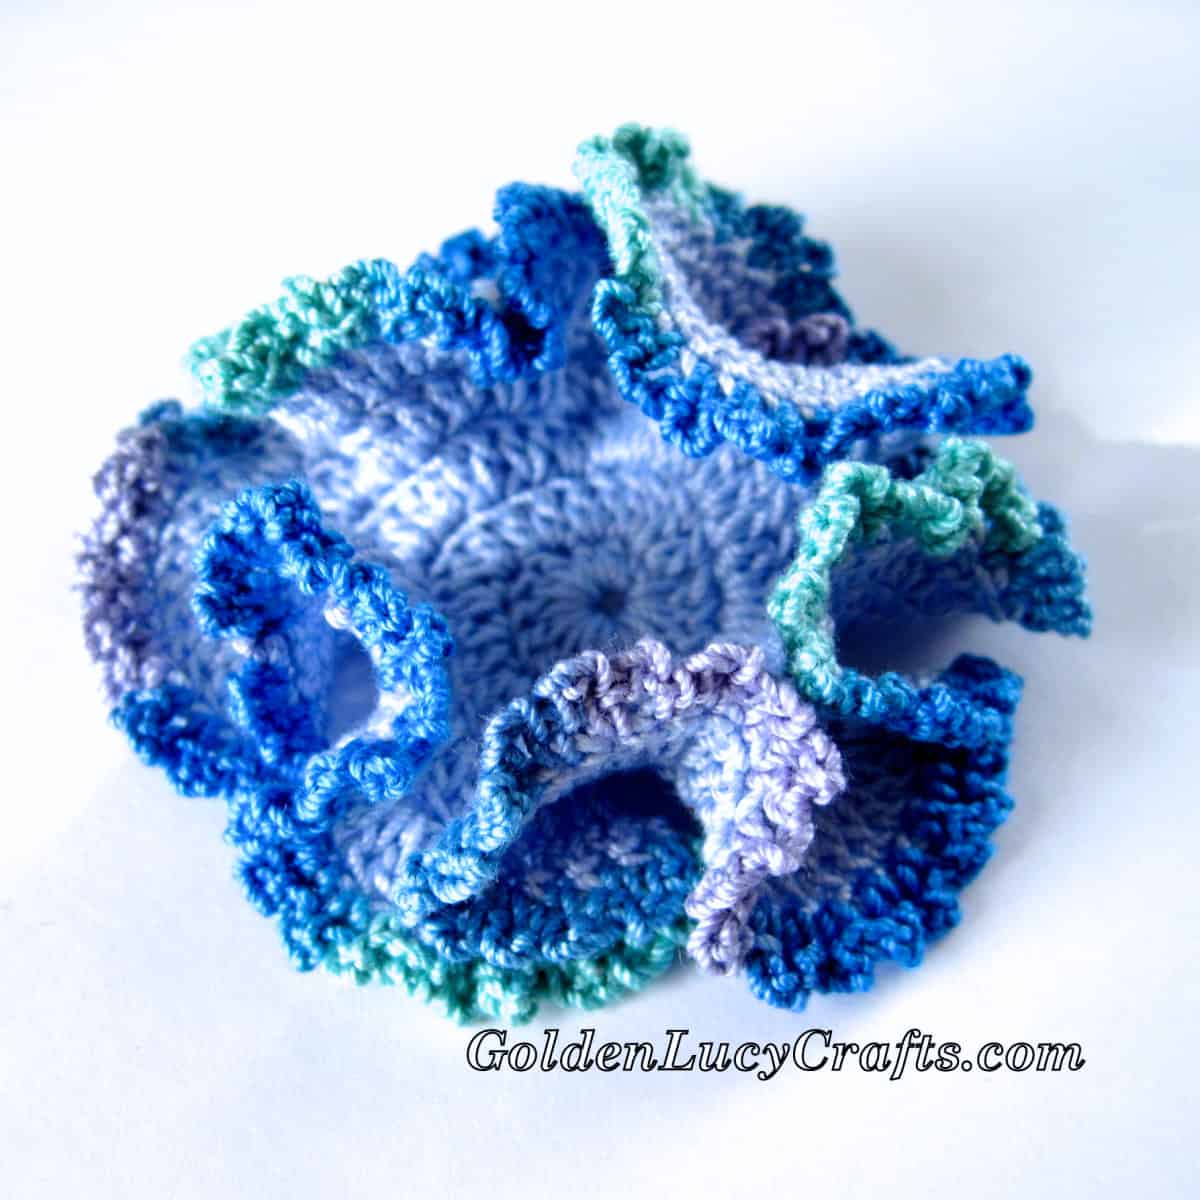 Crochet hyperbolic coral in variegated blue colors.